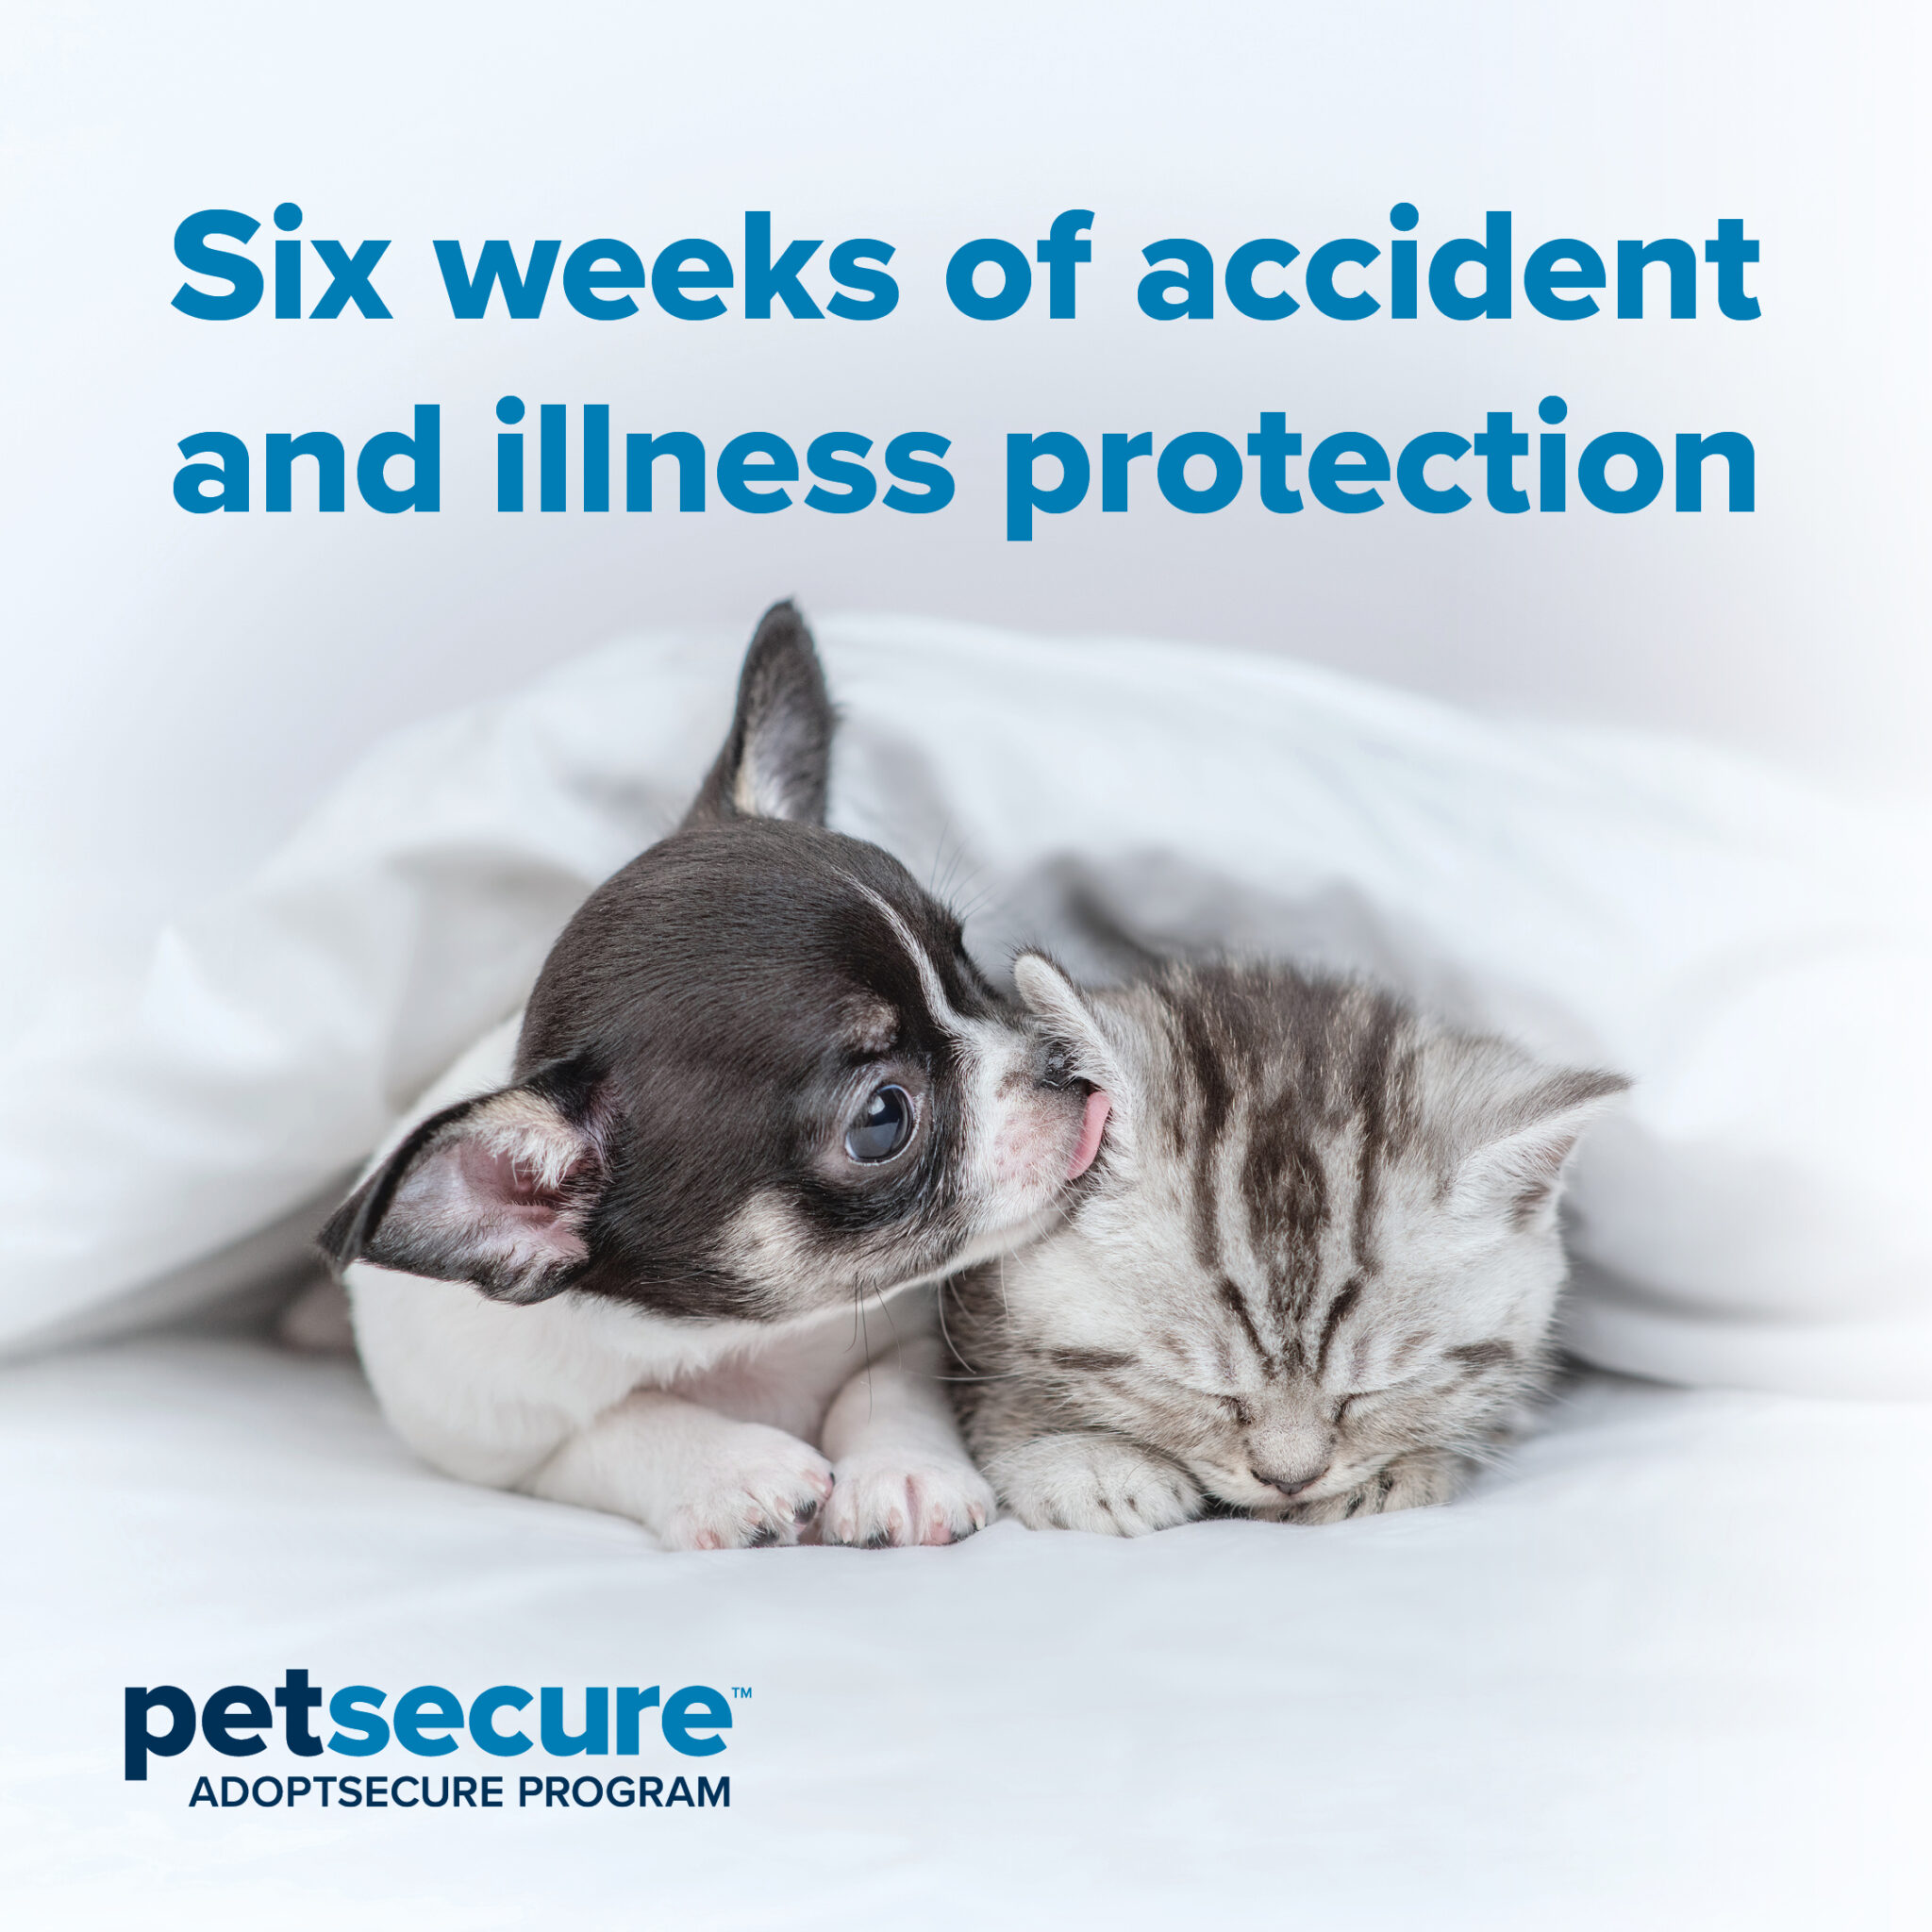 Pet Secure Insurance - Manitoba Mutts Dog Rescue